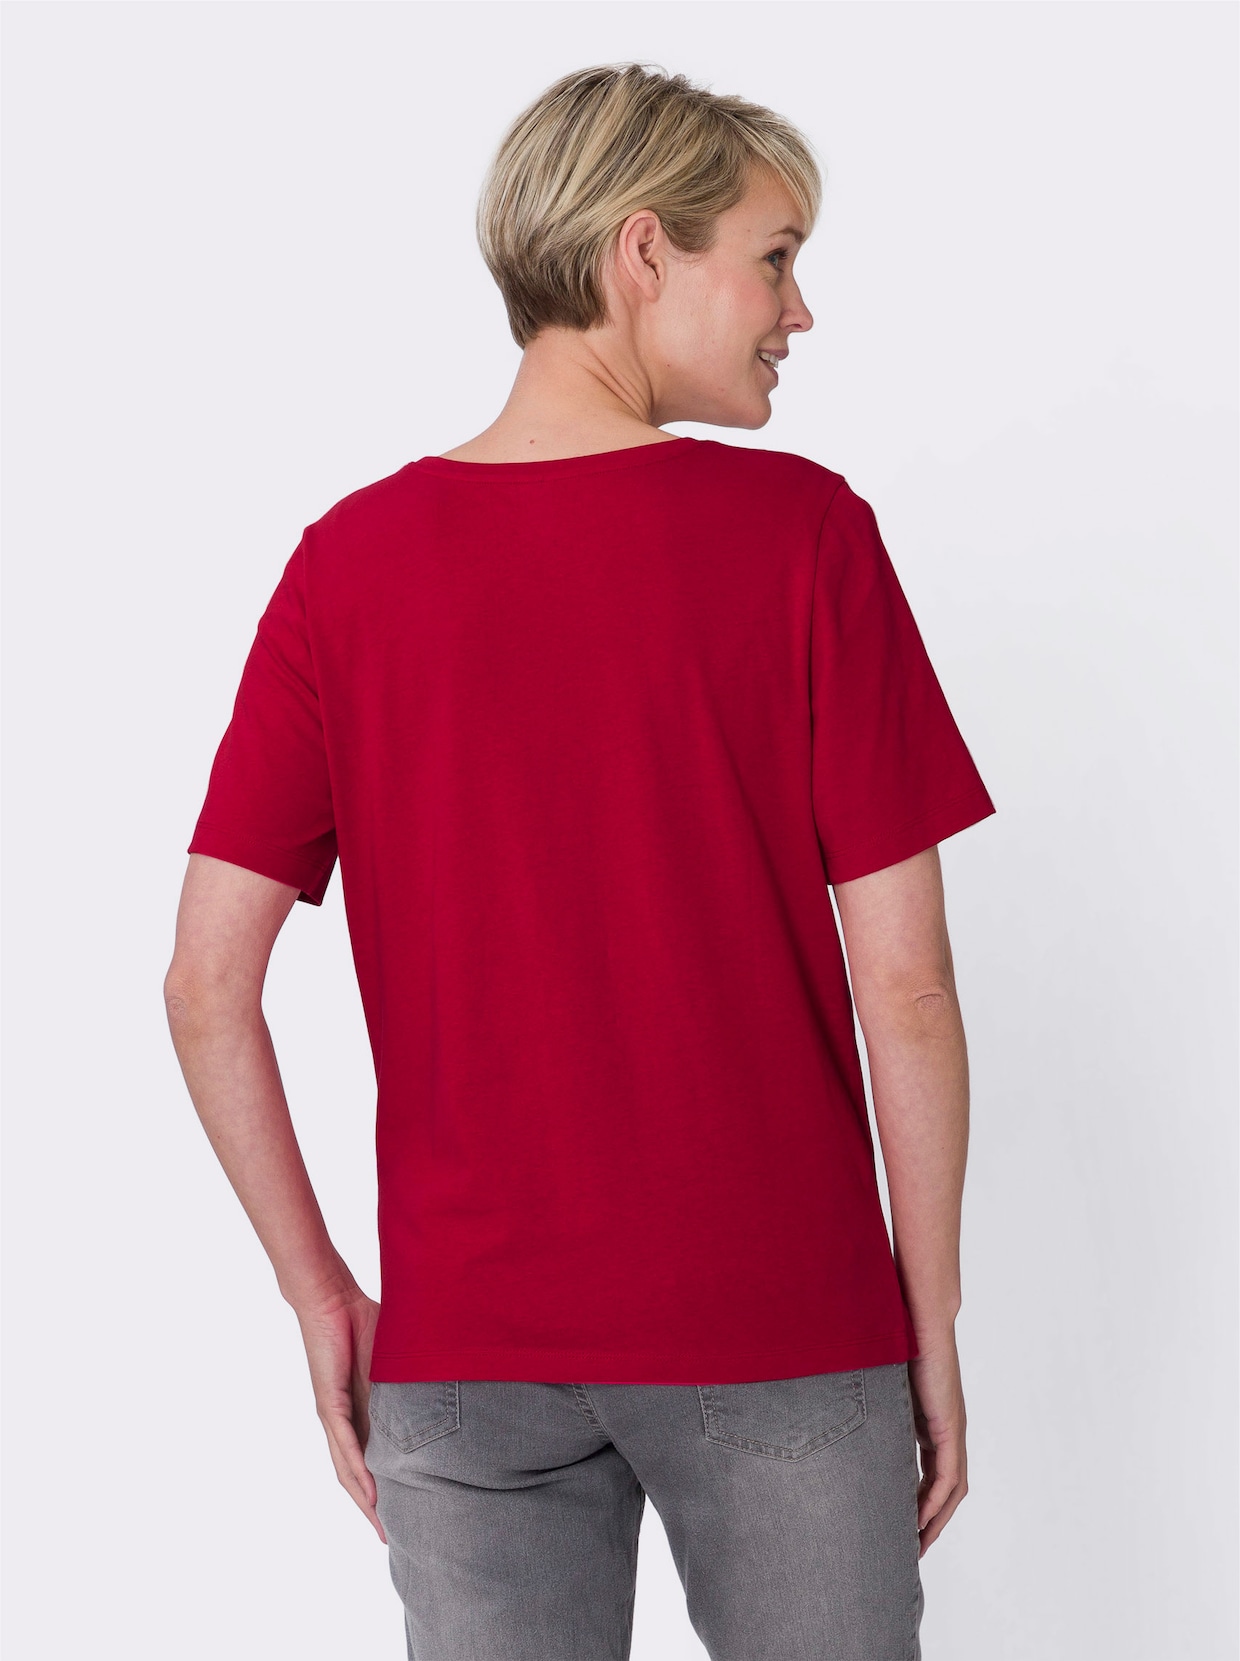 Shirt - rood/wit